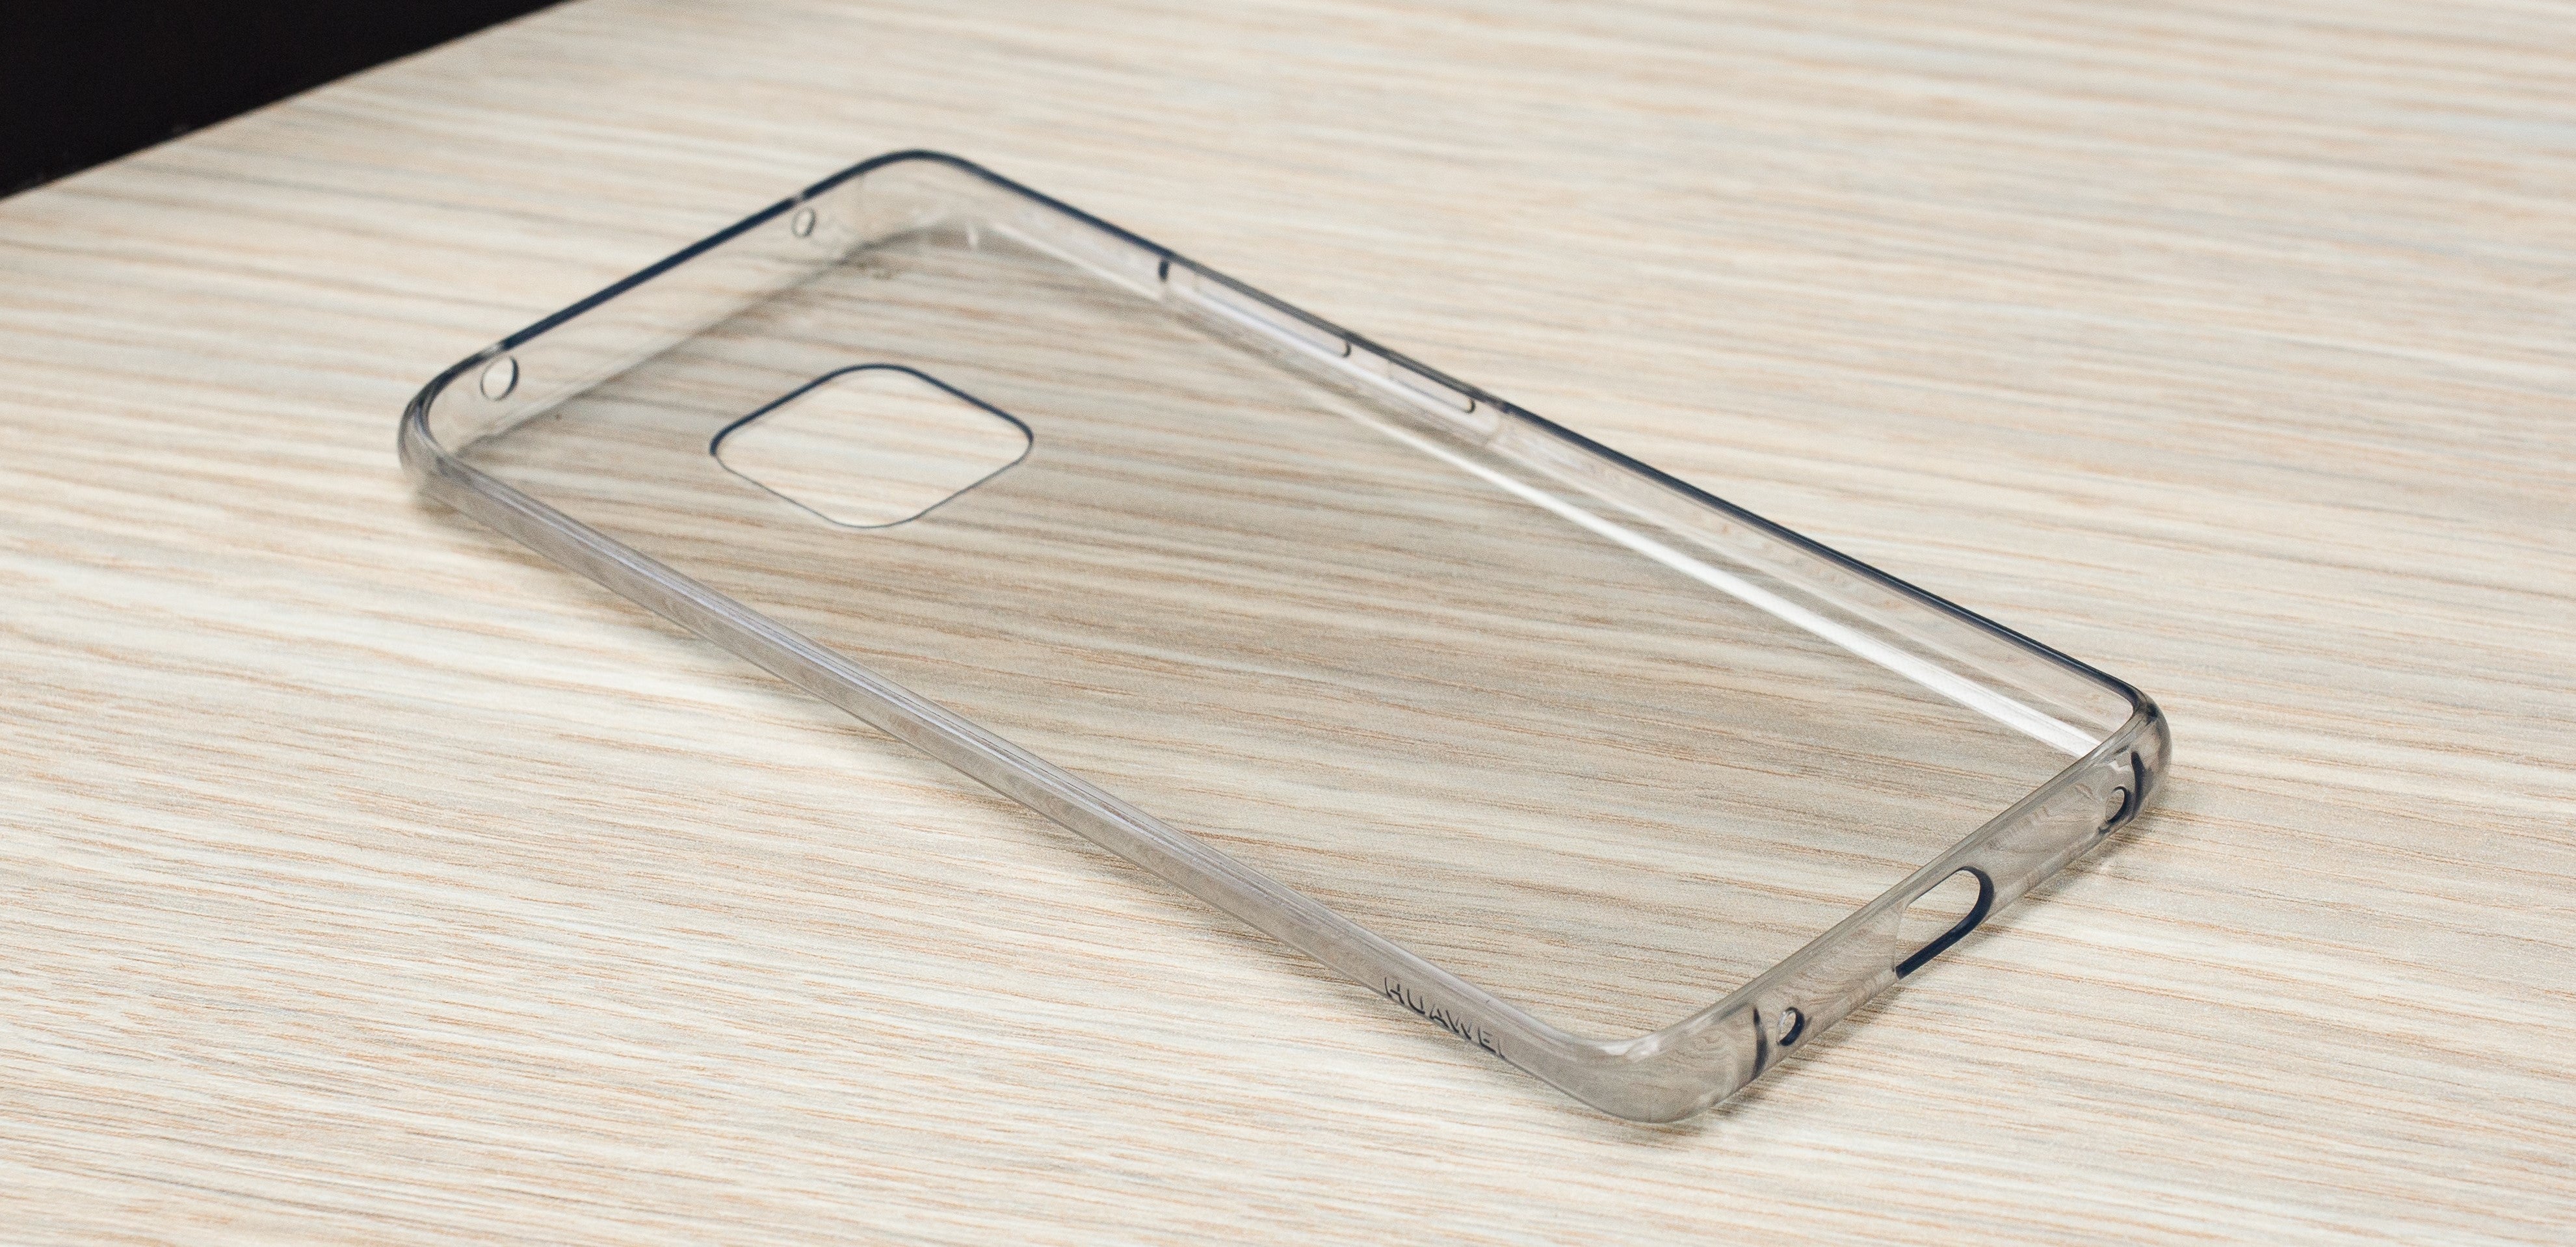 Huawei case patent reveals the Mate 30 Pro might have five cameras on the back